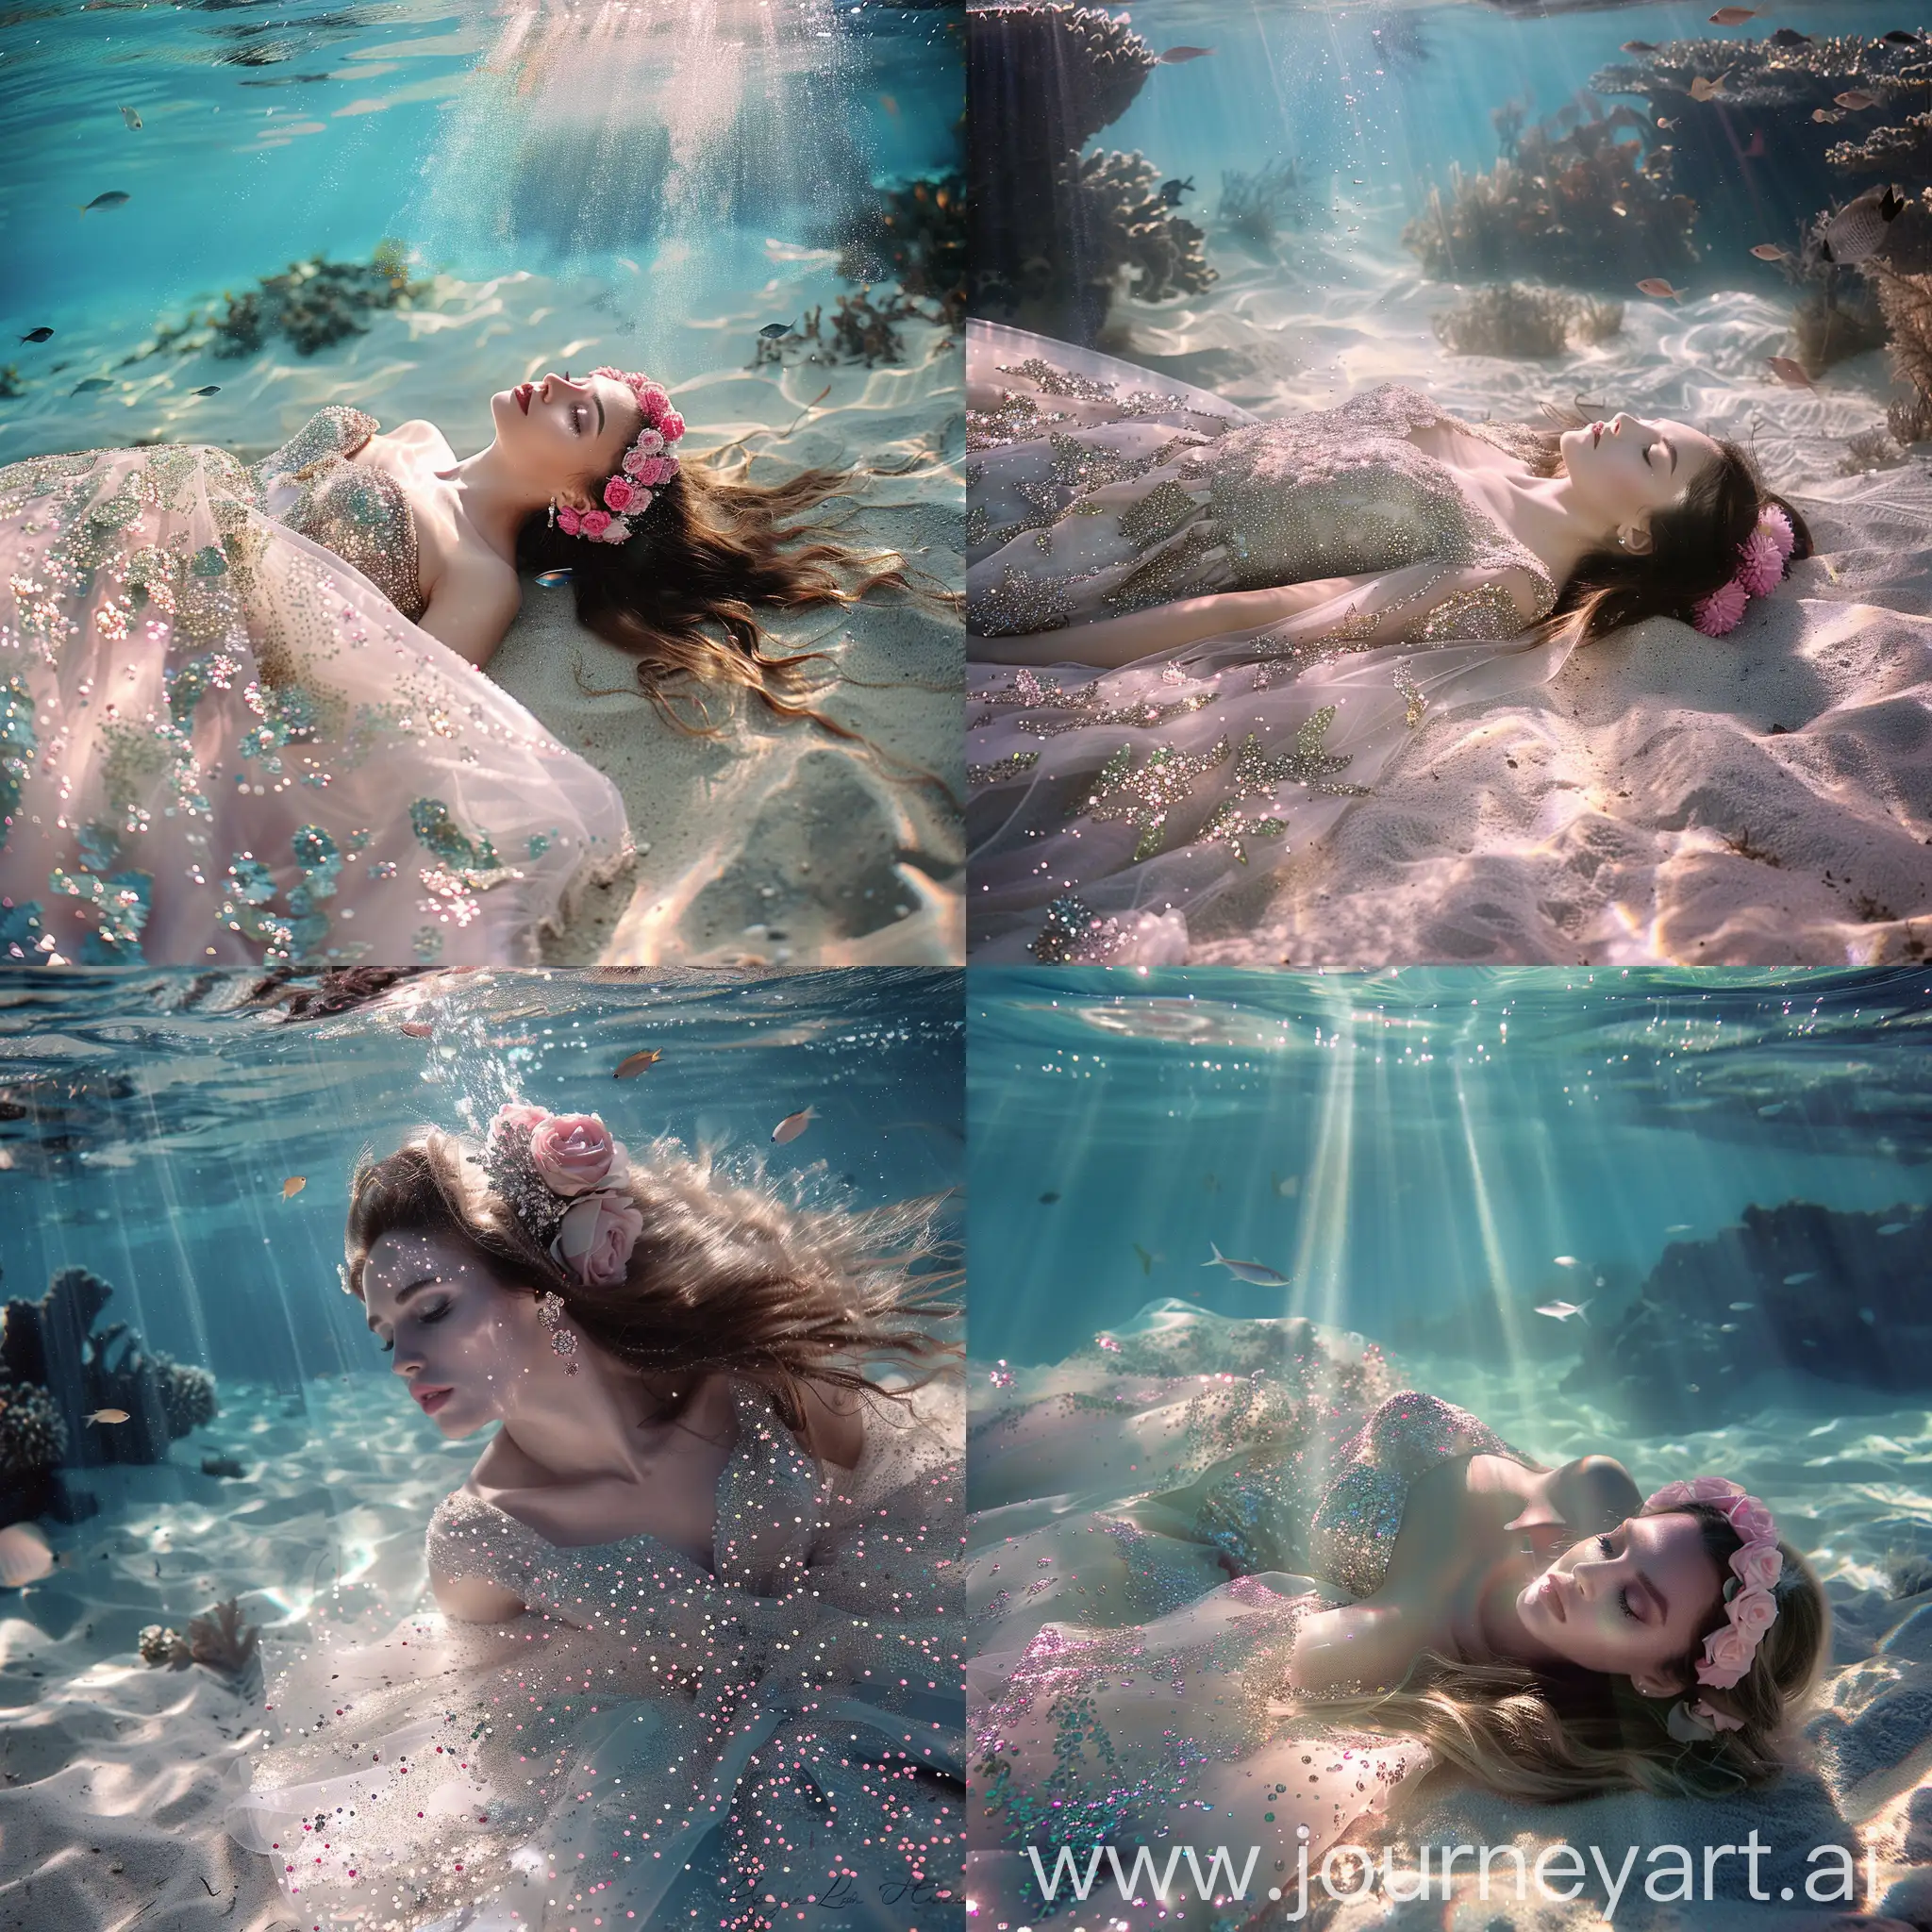 A photographic image of an under water scene of a beautiful woman with delicate facial features lying just above the sandy sea bed. She is wearing a wedding dress and has pink flowers in her long hair. The dress is floating up in the water. The sequins on her dress are sparkling in the ray of sunshine coming down through the clear blue water. There are a few fish nearby.